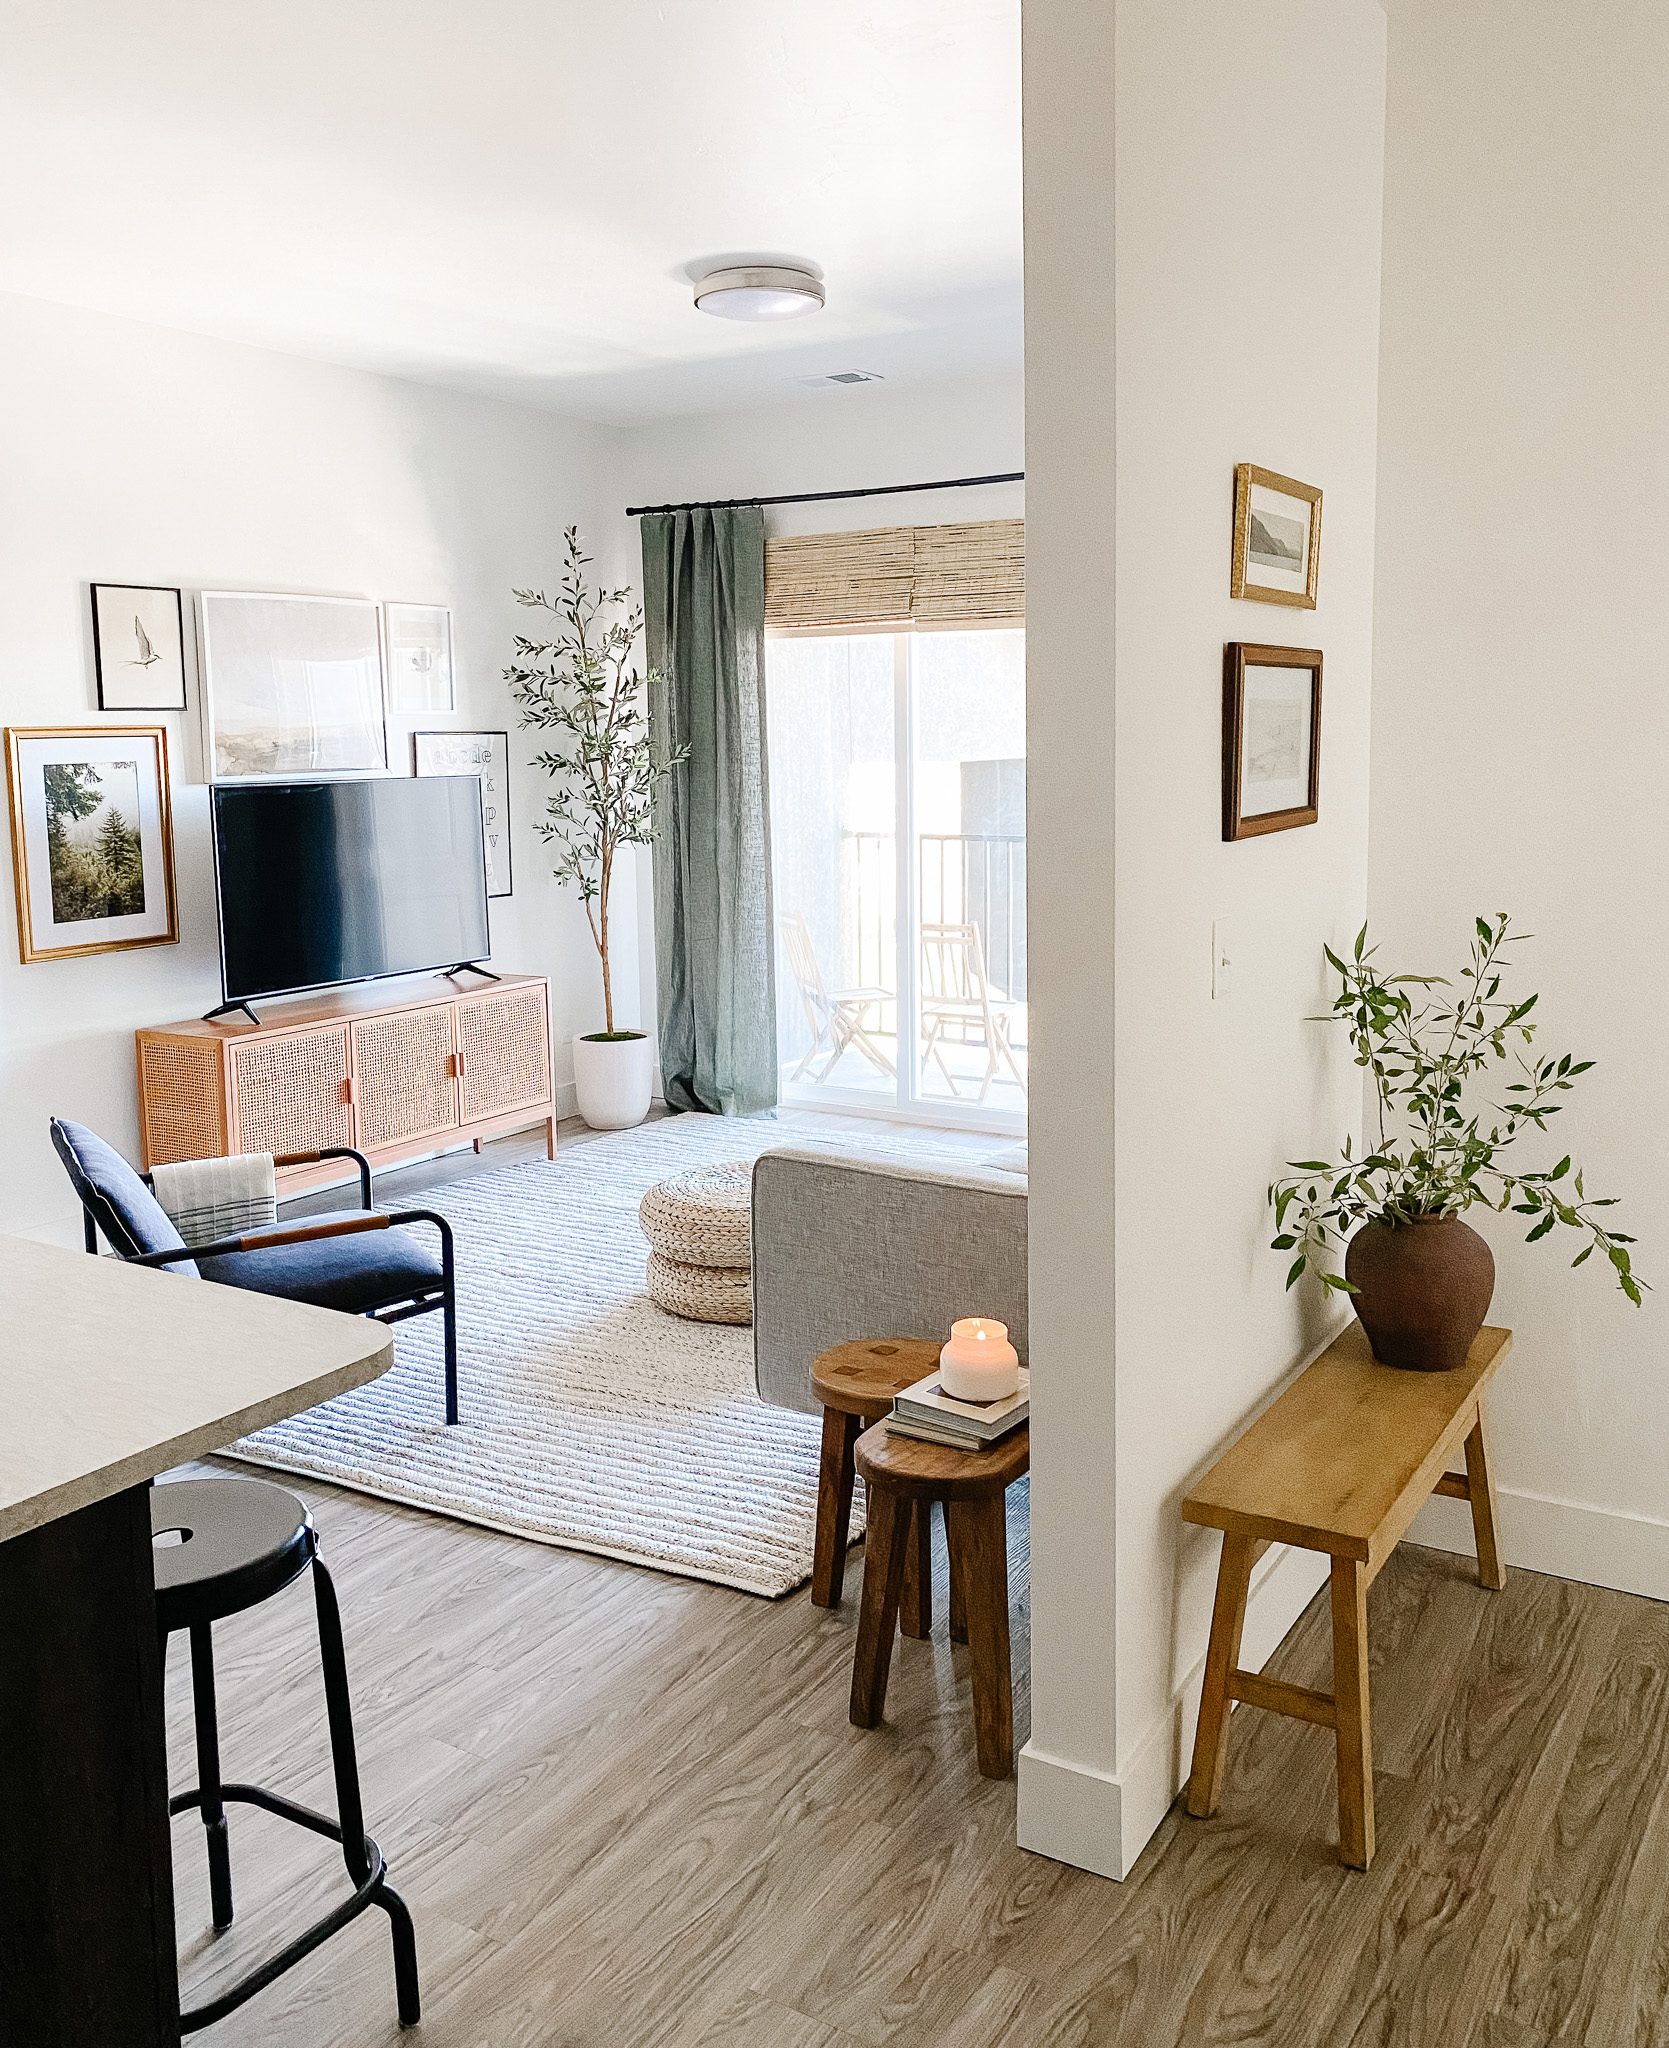 33 Apartment Decorating Ideas to Make Your Rental Feel Like Home